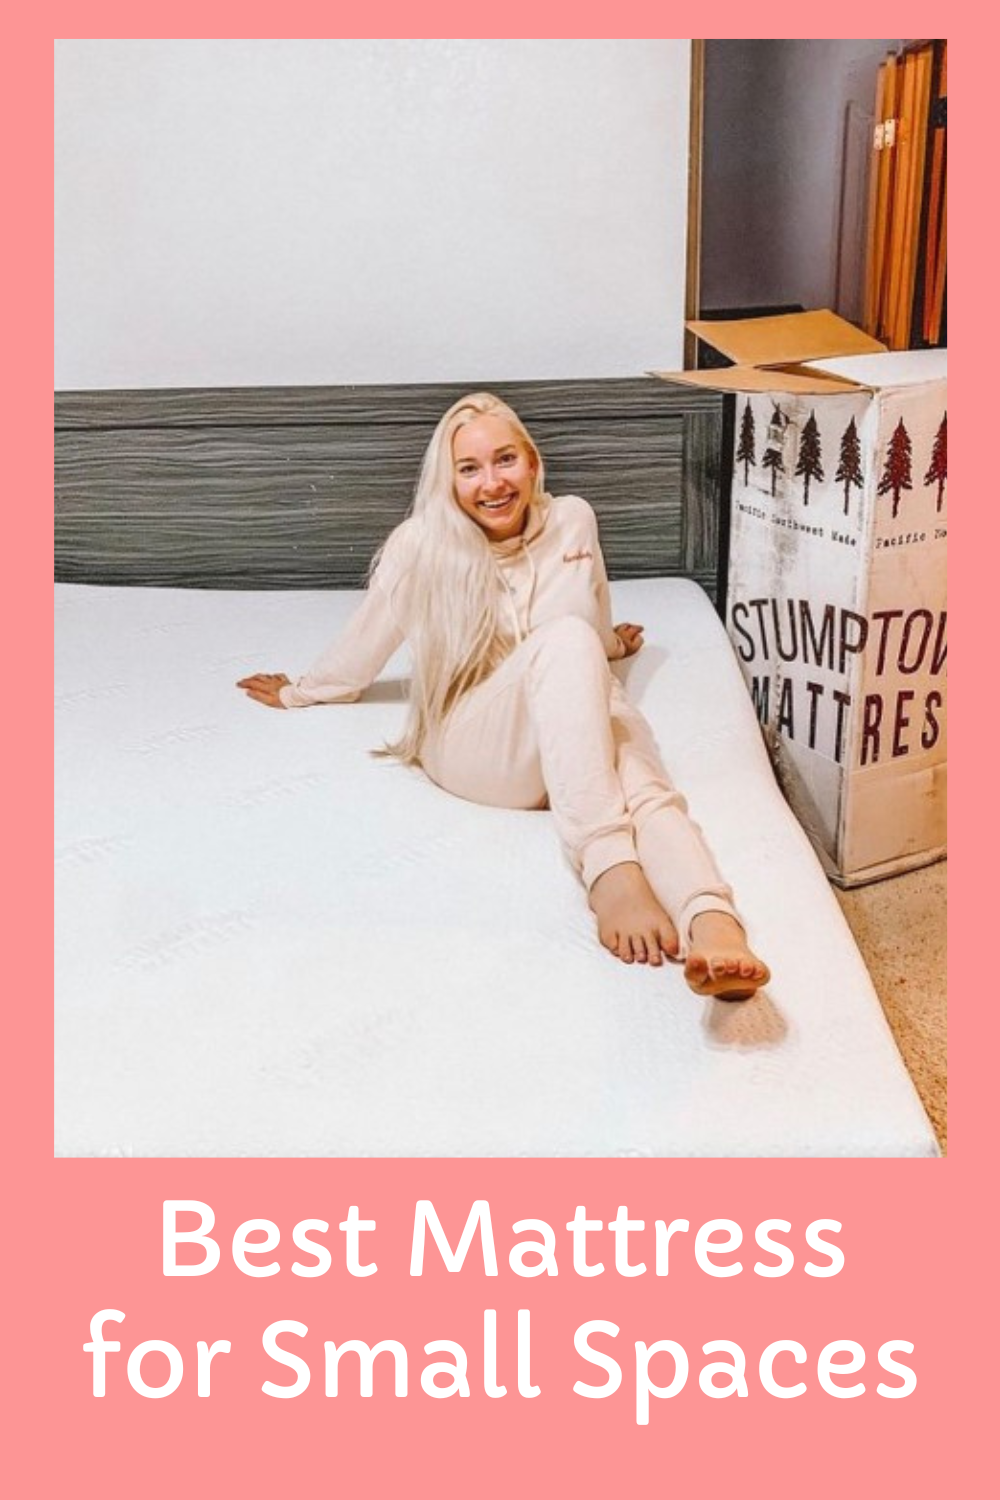 Happy customer sits on the best mattress for a condo or apartment 